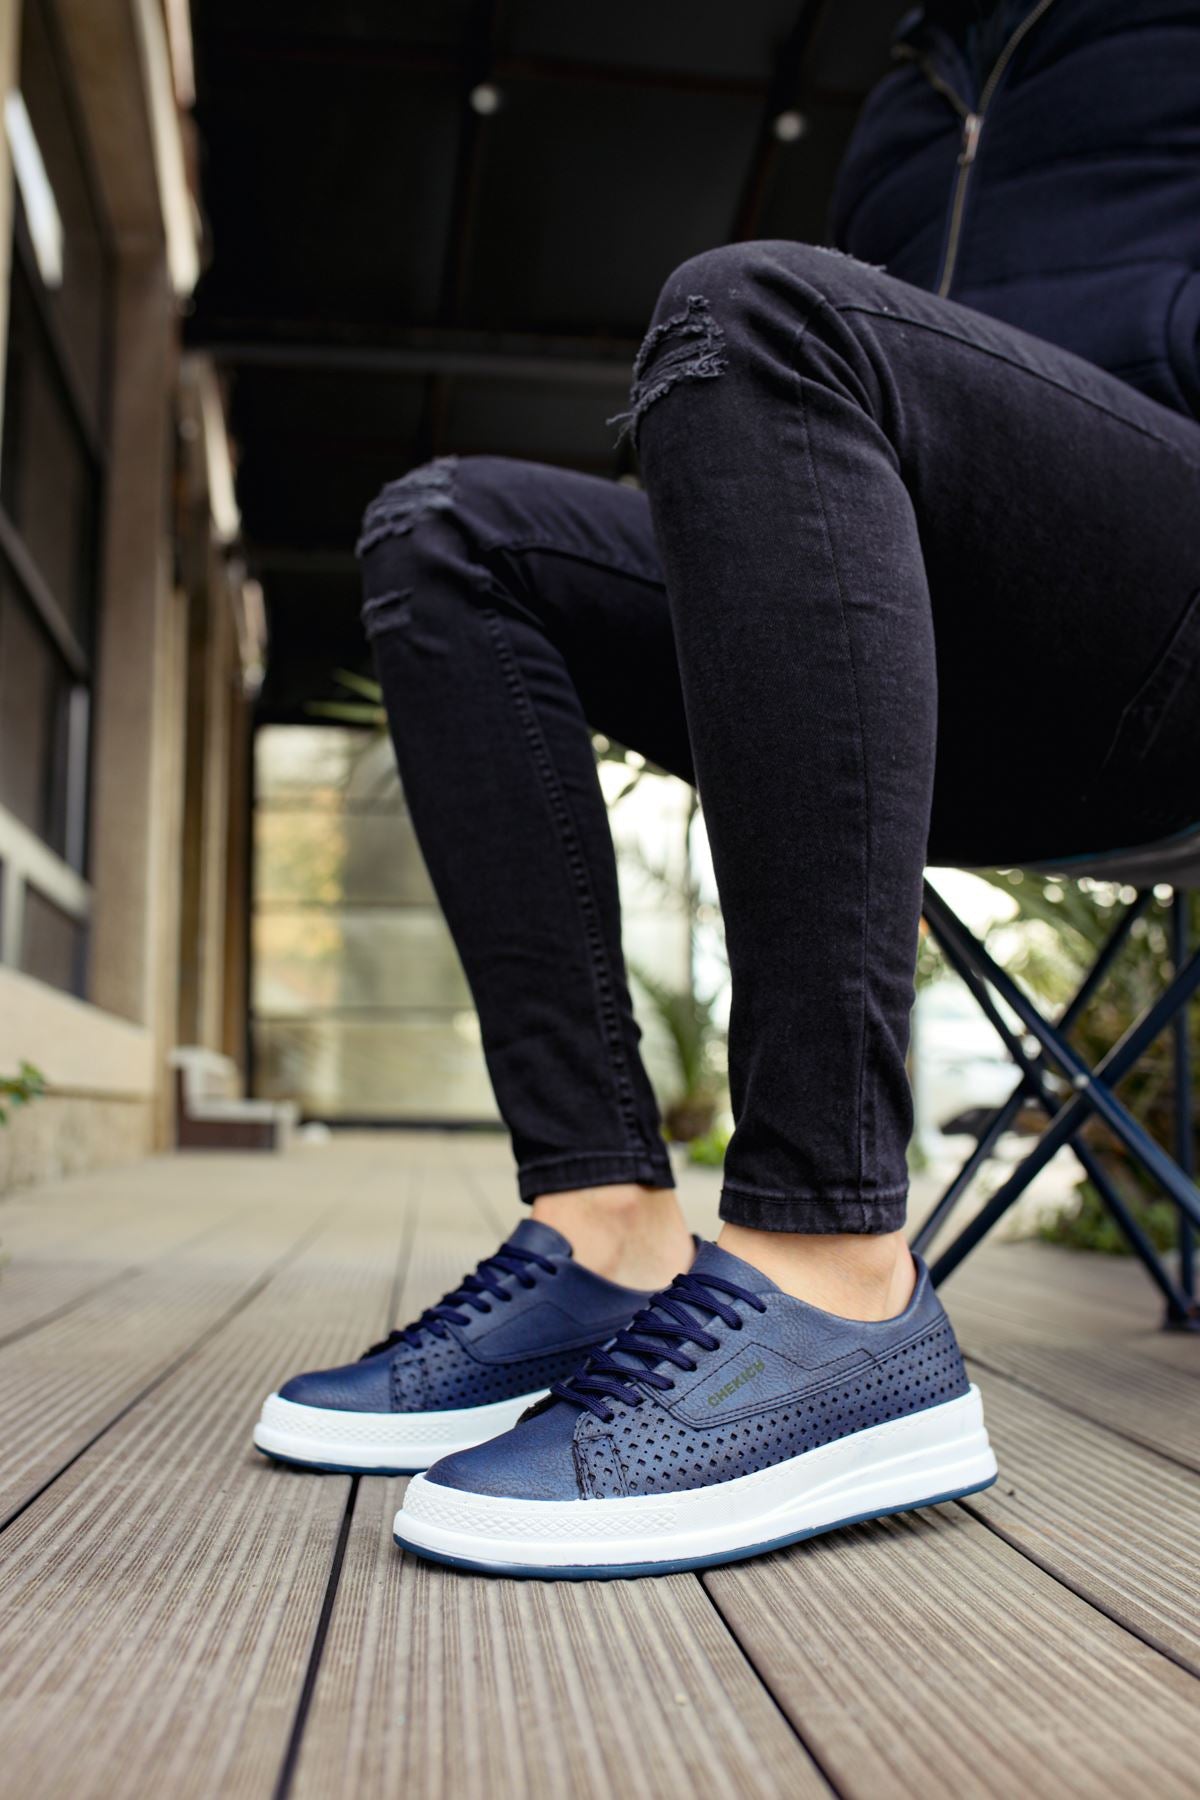 CH043 Men's Unisex Navy Blue-White Sole Casual Shoes - STREETMODE™